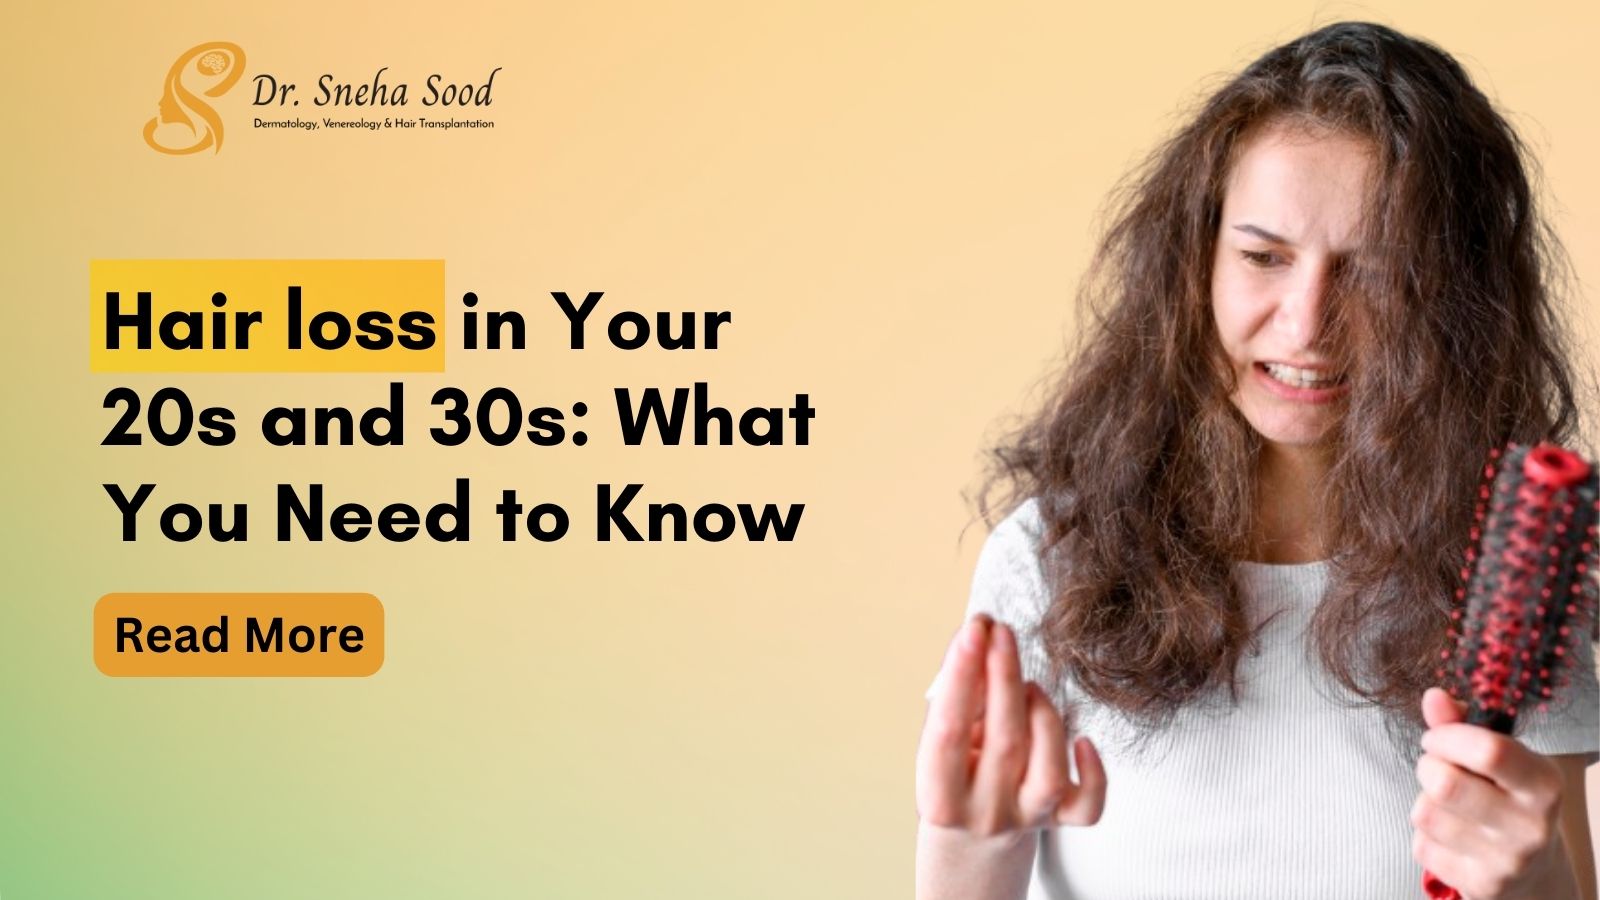 Hair Loss in Your 20s and 30s: What You Need to Know